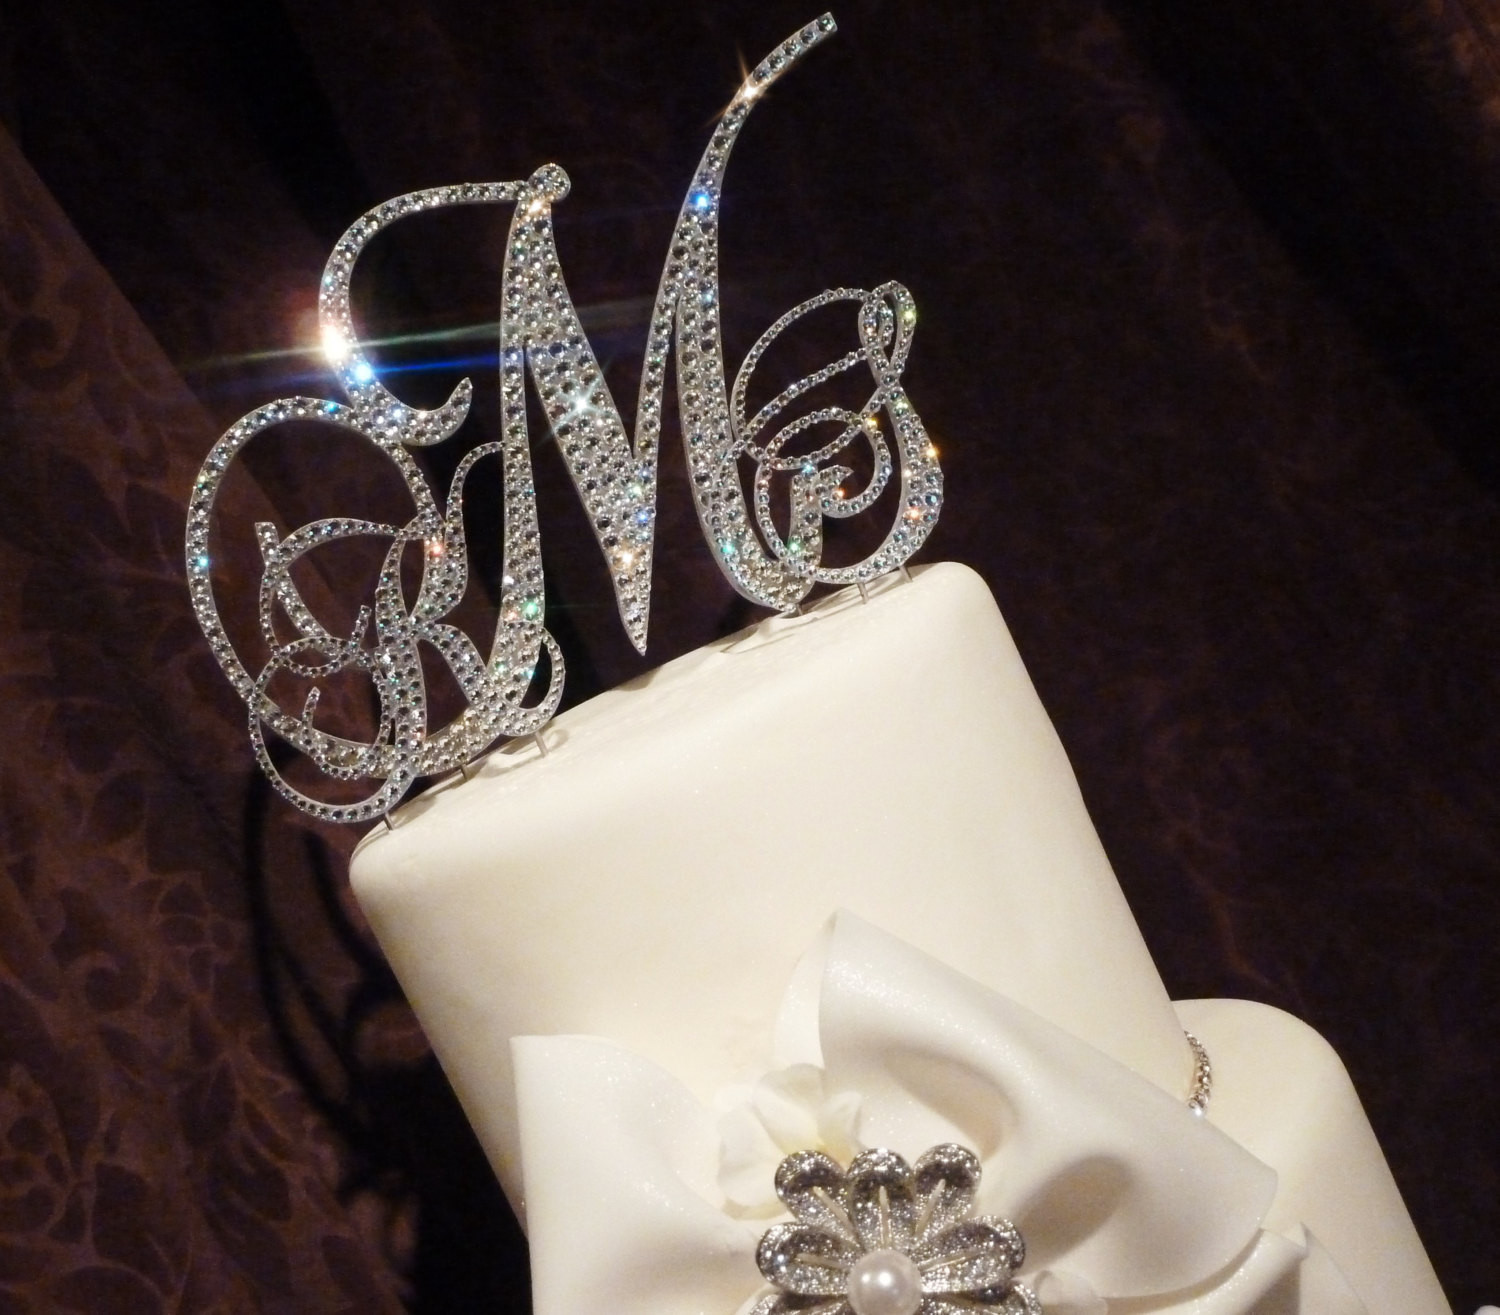 Personalized Cake Toppers For Wedding Cakes
 Monogram Wedding Cake Toppers Ideas MARGUSRIGA Baby Party